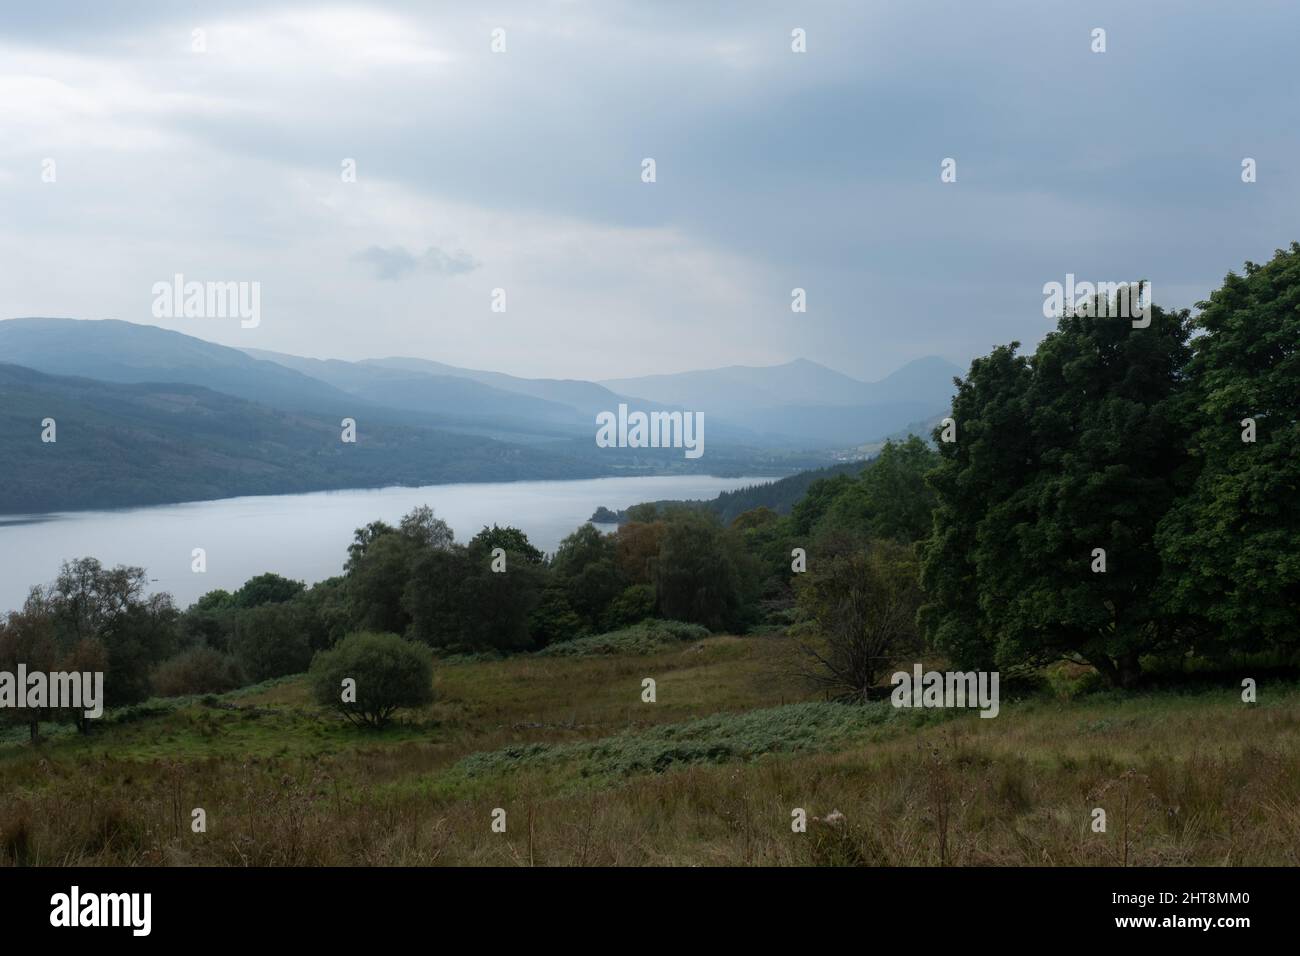 A view over Loch Tay from the north side near Fearnan towards Loch Lomond and Ben More, in Perth and Kinross, Scotland, United Kingdom Stock Photo